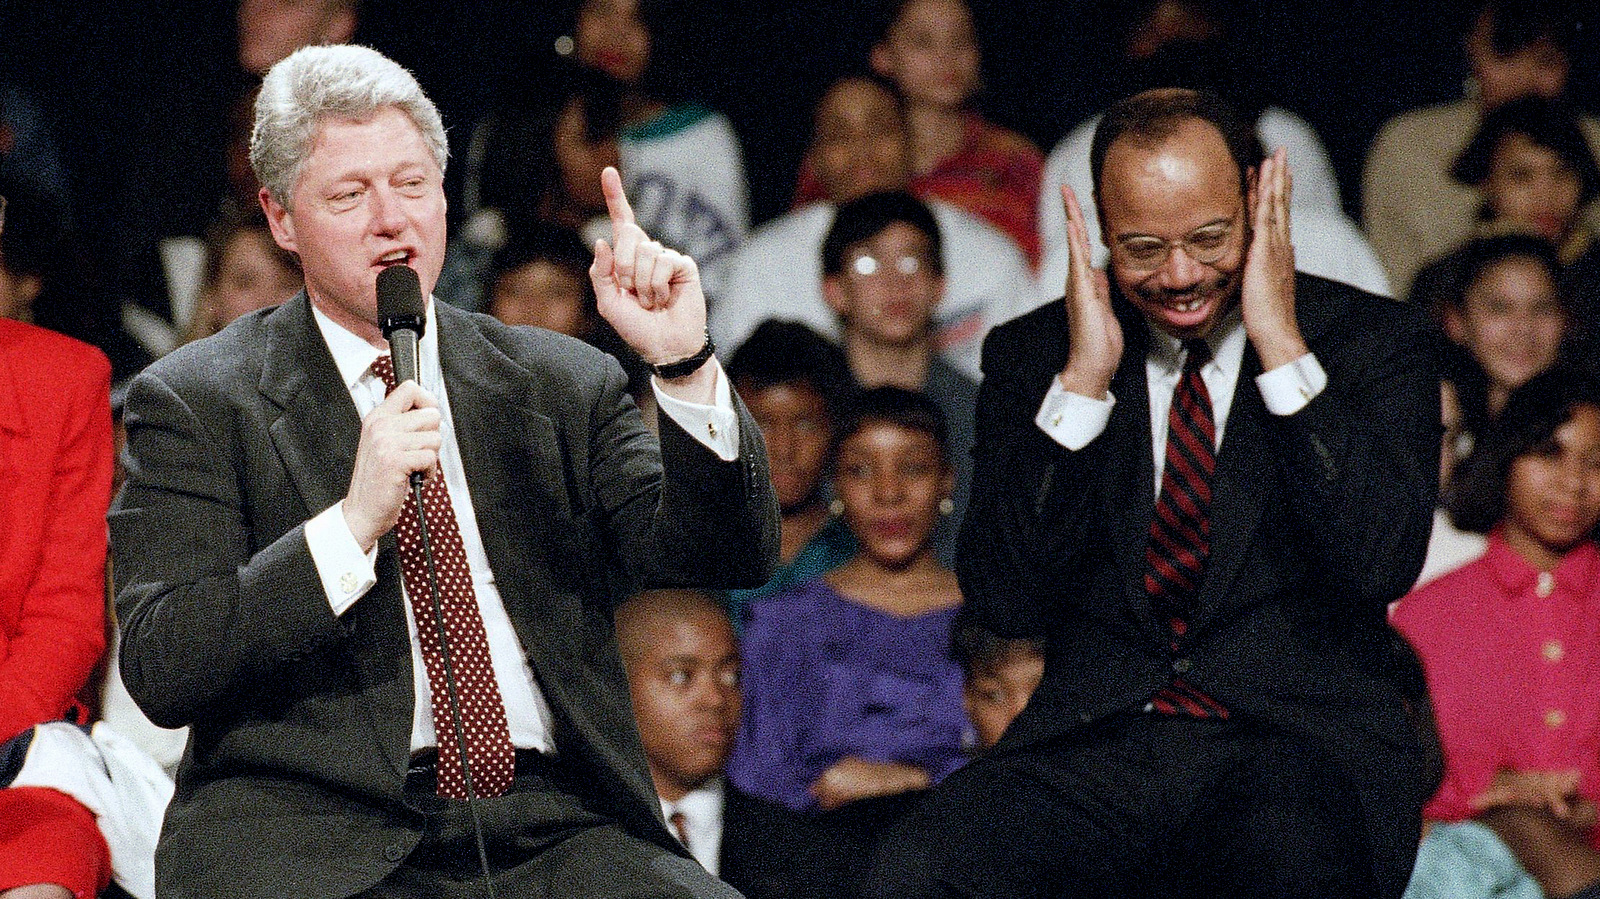 U.S. Rep. Mel Reynolds (D-Ill.) and President Bill Clinton answer questions posed by a student at suburban Hillcrest High School in Country Club Hills, Ill., Feb. 28, 1994. (AP/Tim Boyle)